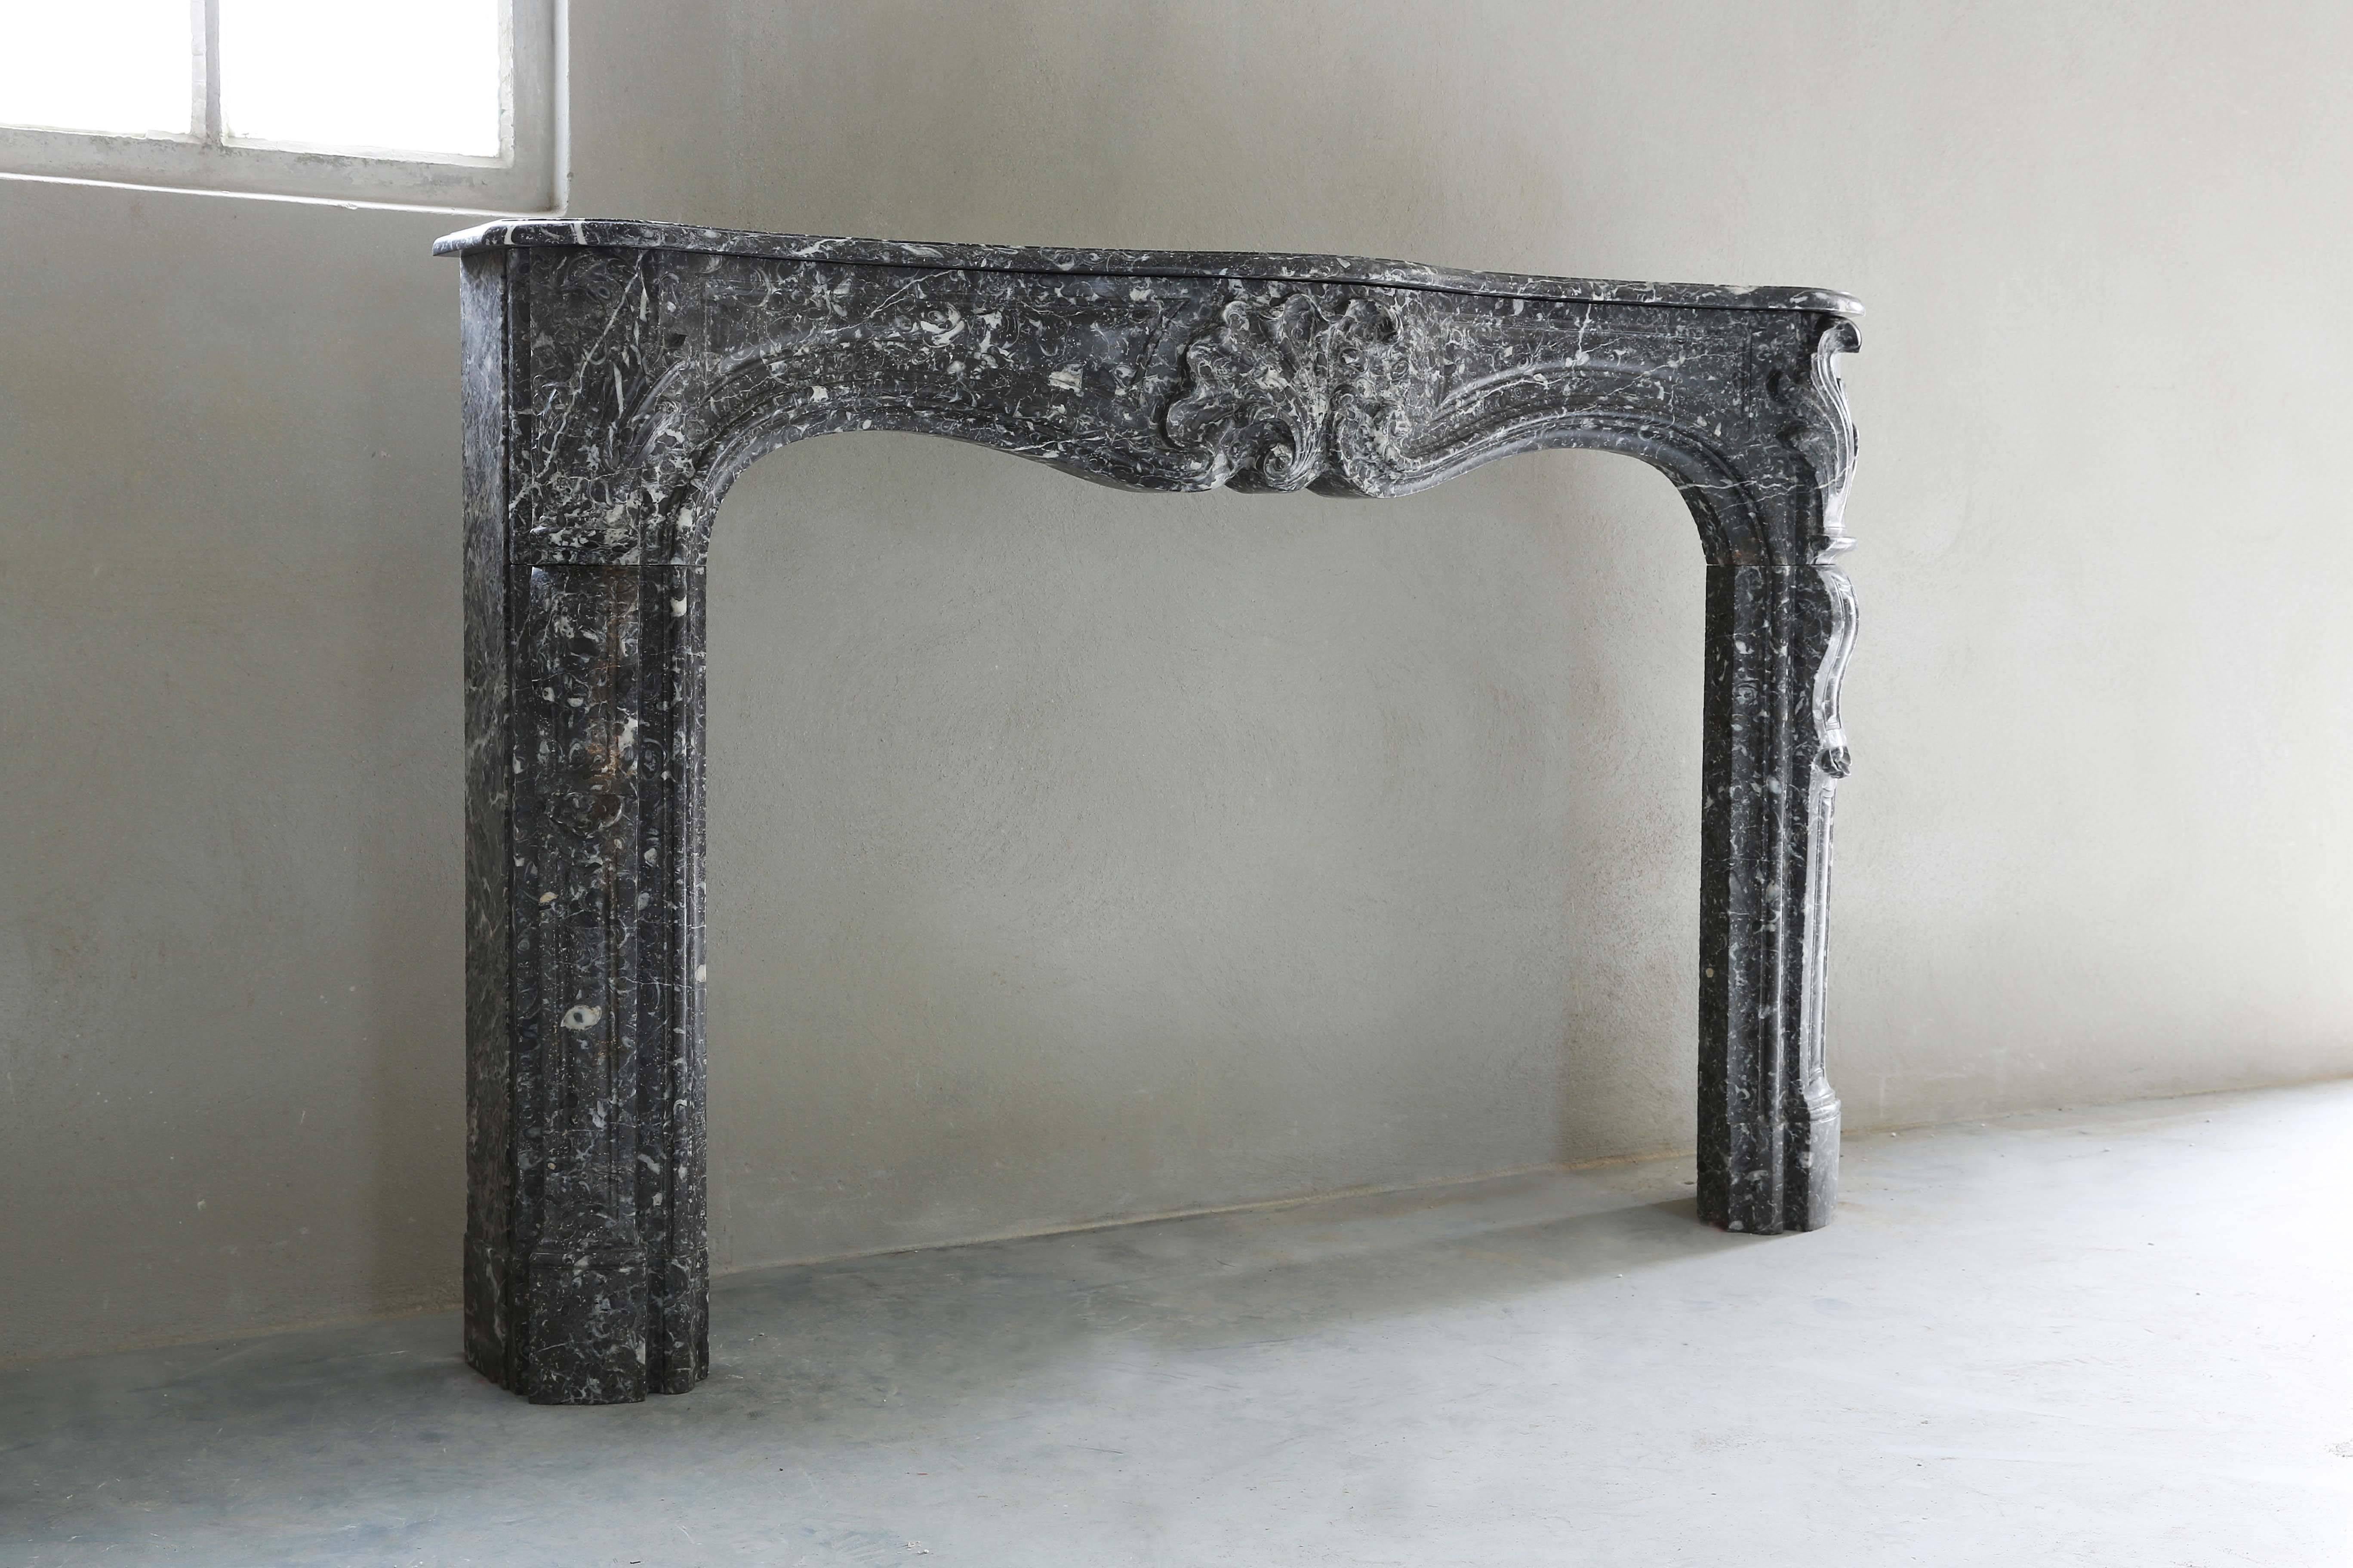 A decorating and charming antique fireplace with nice coquilles in the style of Louis XV. The kind of marble is Gris de Ardennes and comes from Belgium.